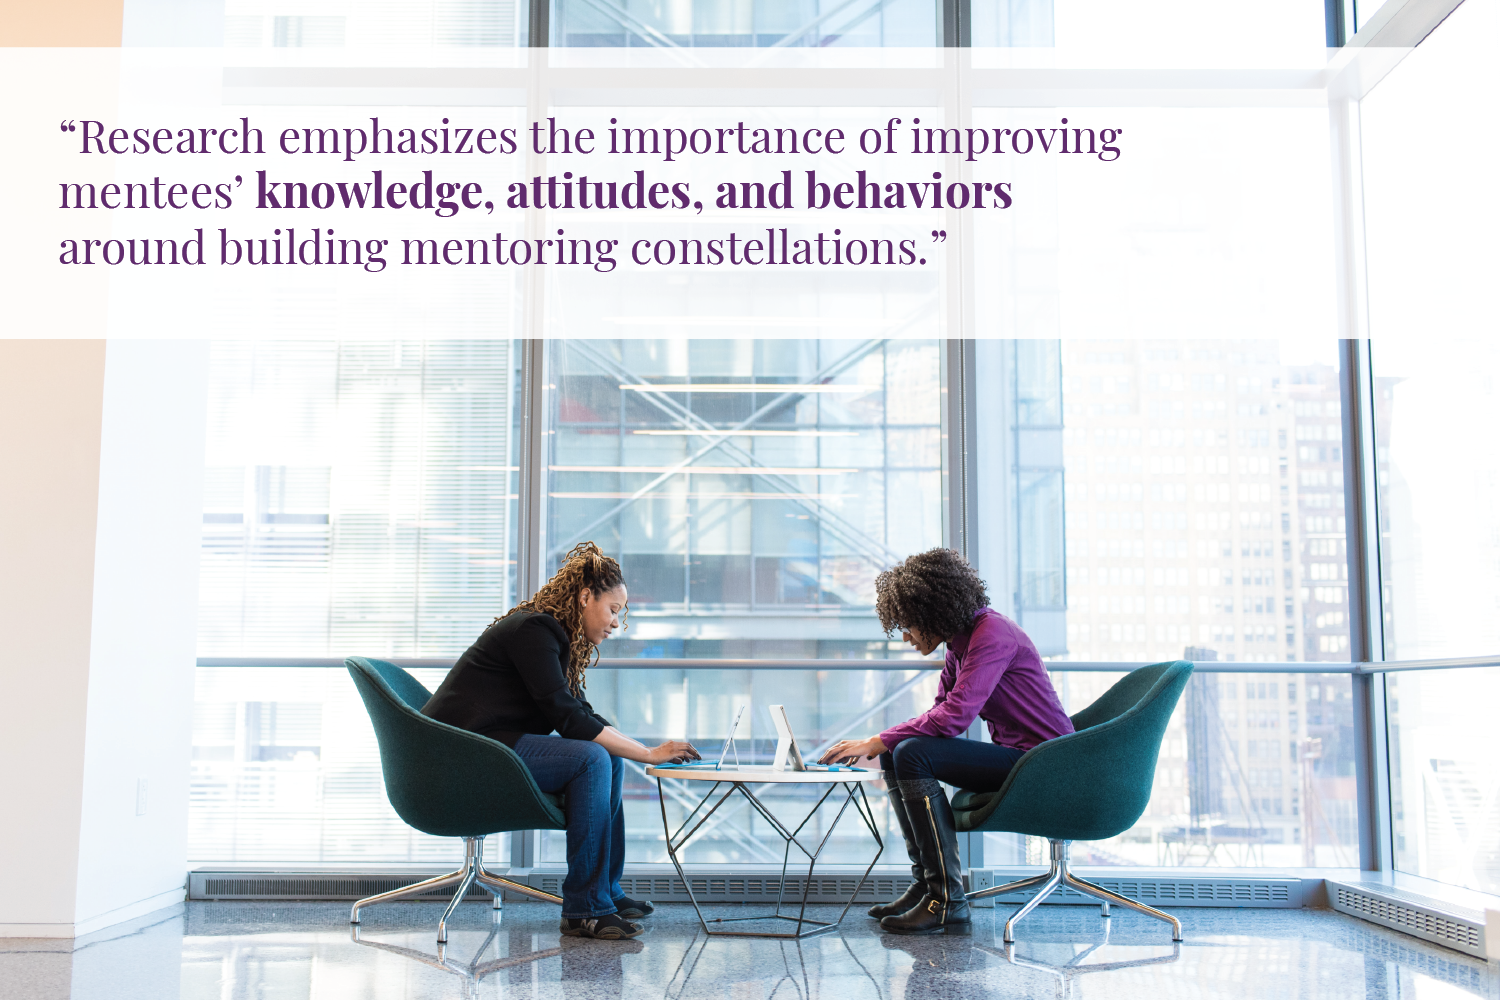 Two dark-skinned women sit in chairs facing each other. Each works over a laptop that rests on a small table between them. Text overlay reads "Research emphasizes the importance of improving mentees’ knowledge, attitudes, and behaviors around building mentoring constellations.”